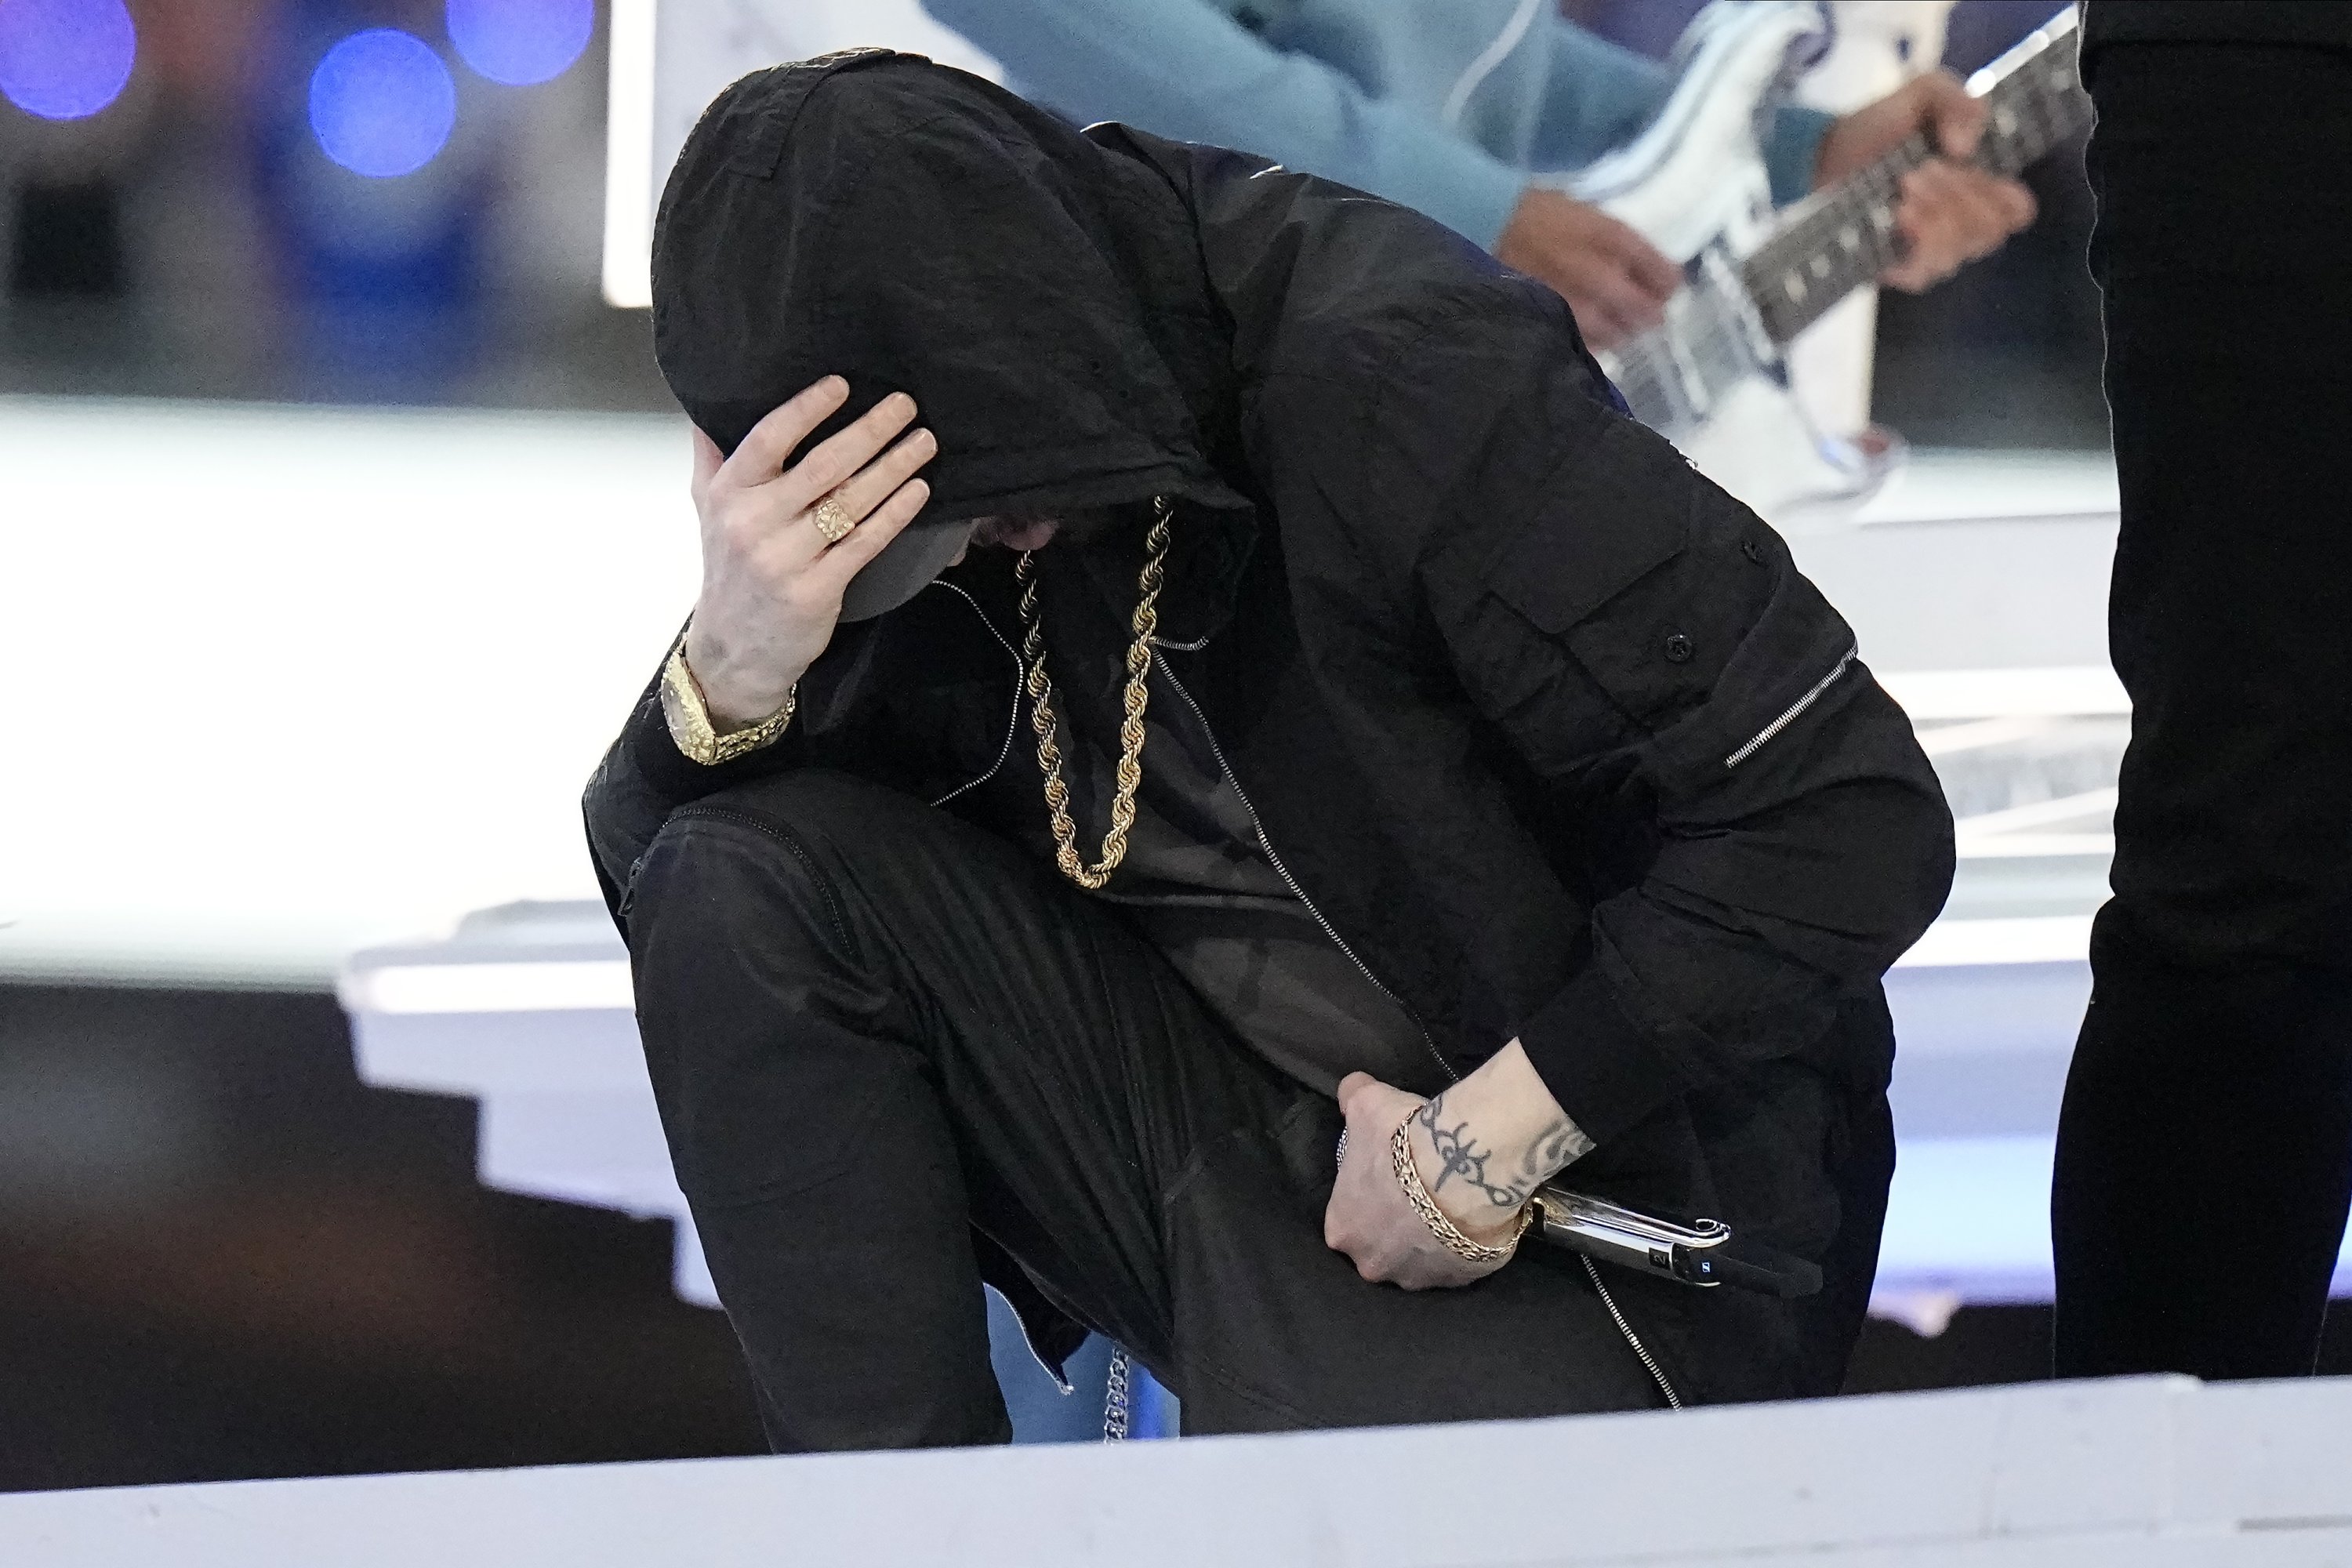 Eminem kneels down during the halftime performance at the NFL Super Bowl 56 football game between the Los Angeles Rams and the Cincinnati Bengals, Feb. 13, 2022, Inglewood, California, U.S. (AP Photo)